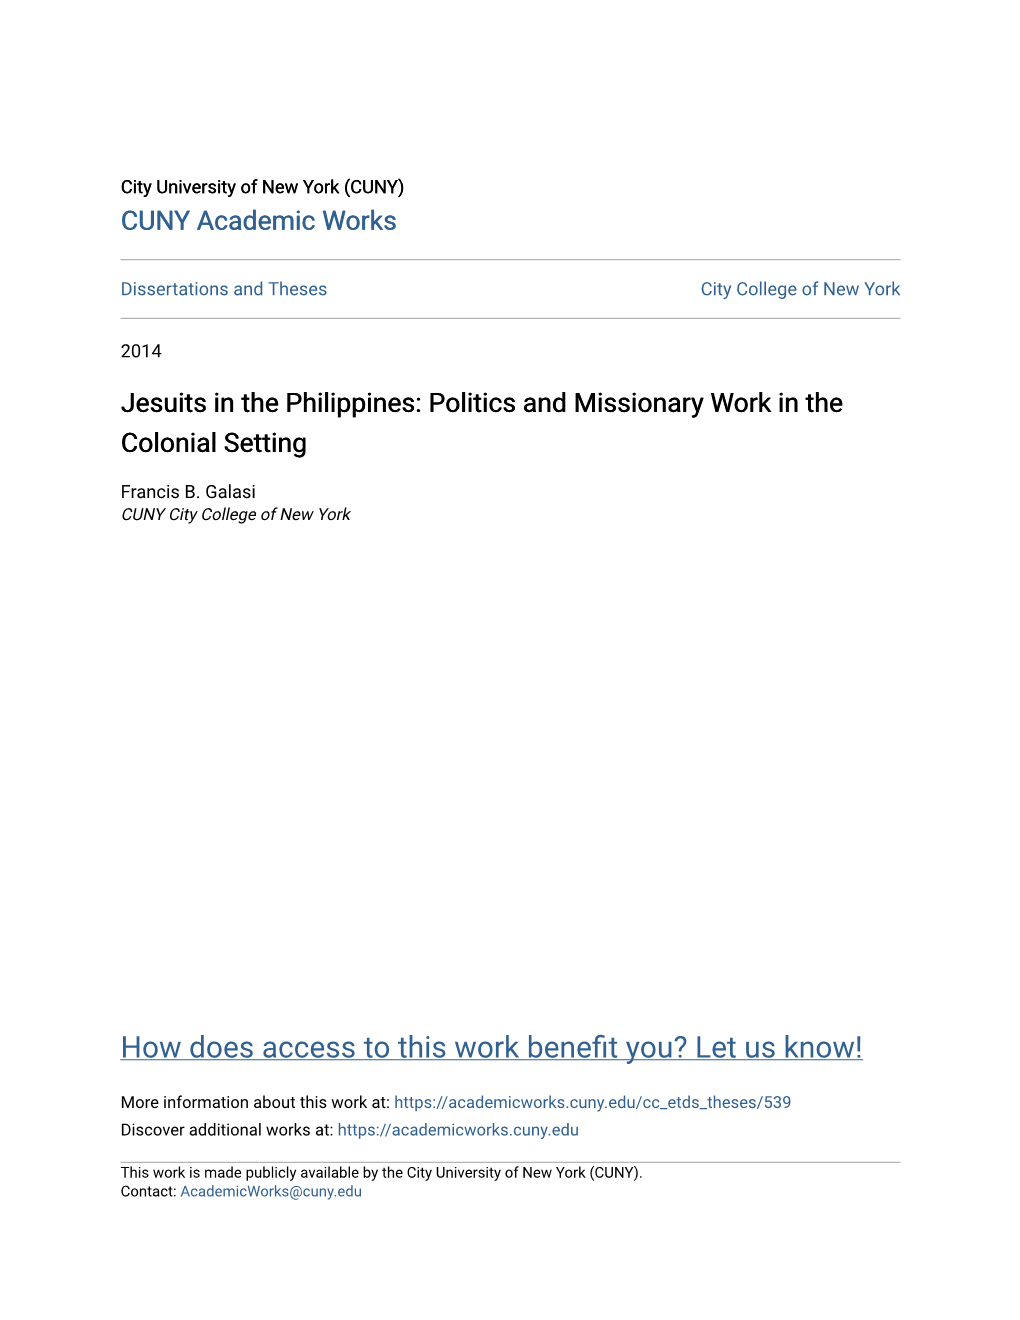 Jesuits in the Philippines: Politics and Missionary Work in the Colonial Setting